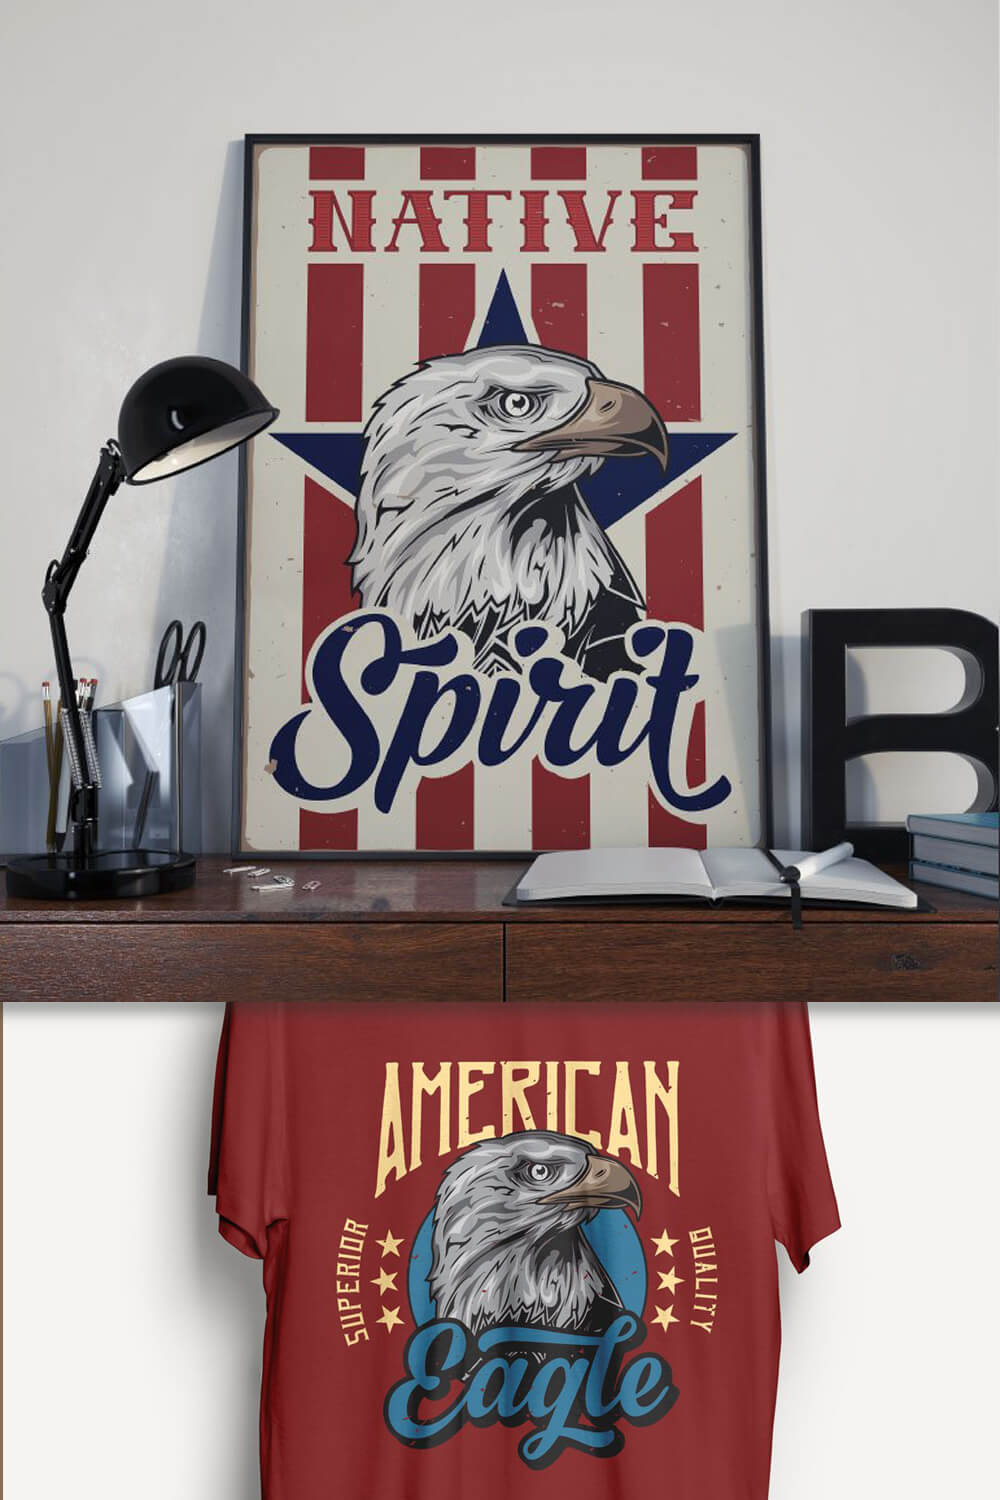 Large national spirit poster with eagle and burgundy t-shirt with "American Eagle" logo.